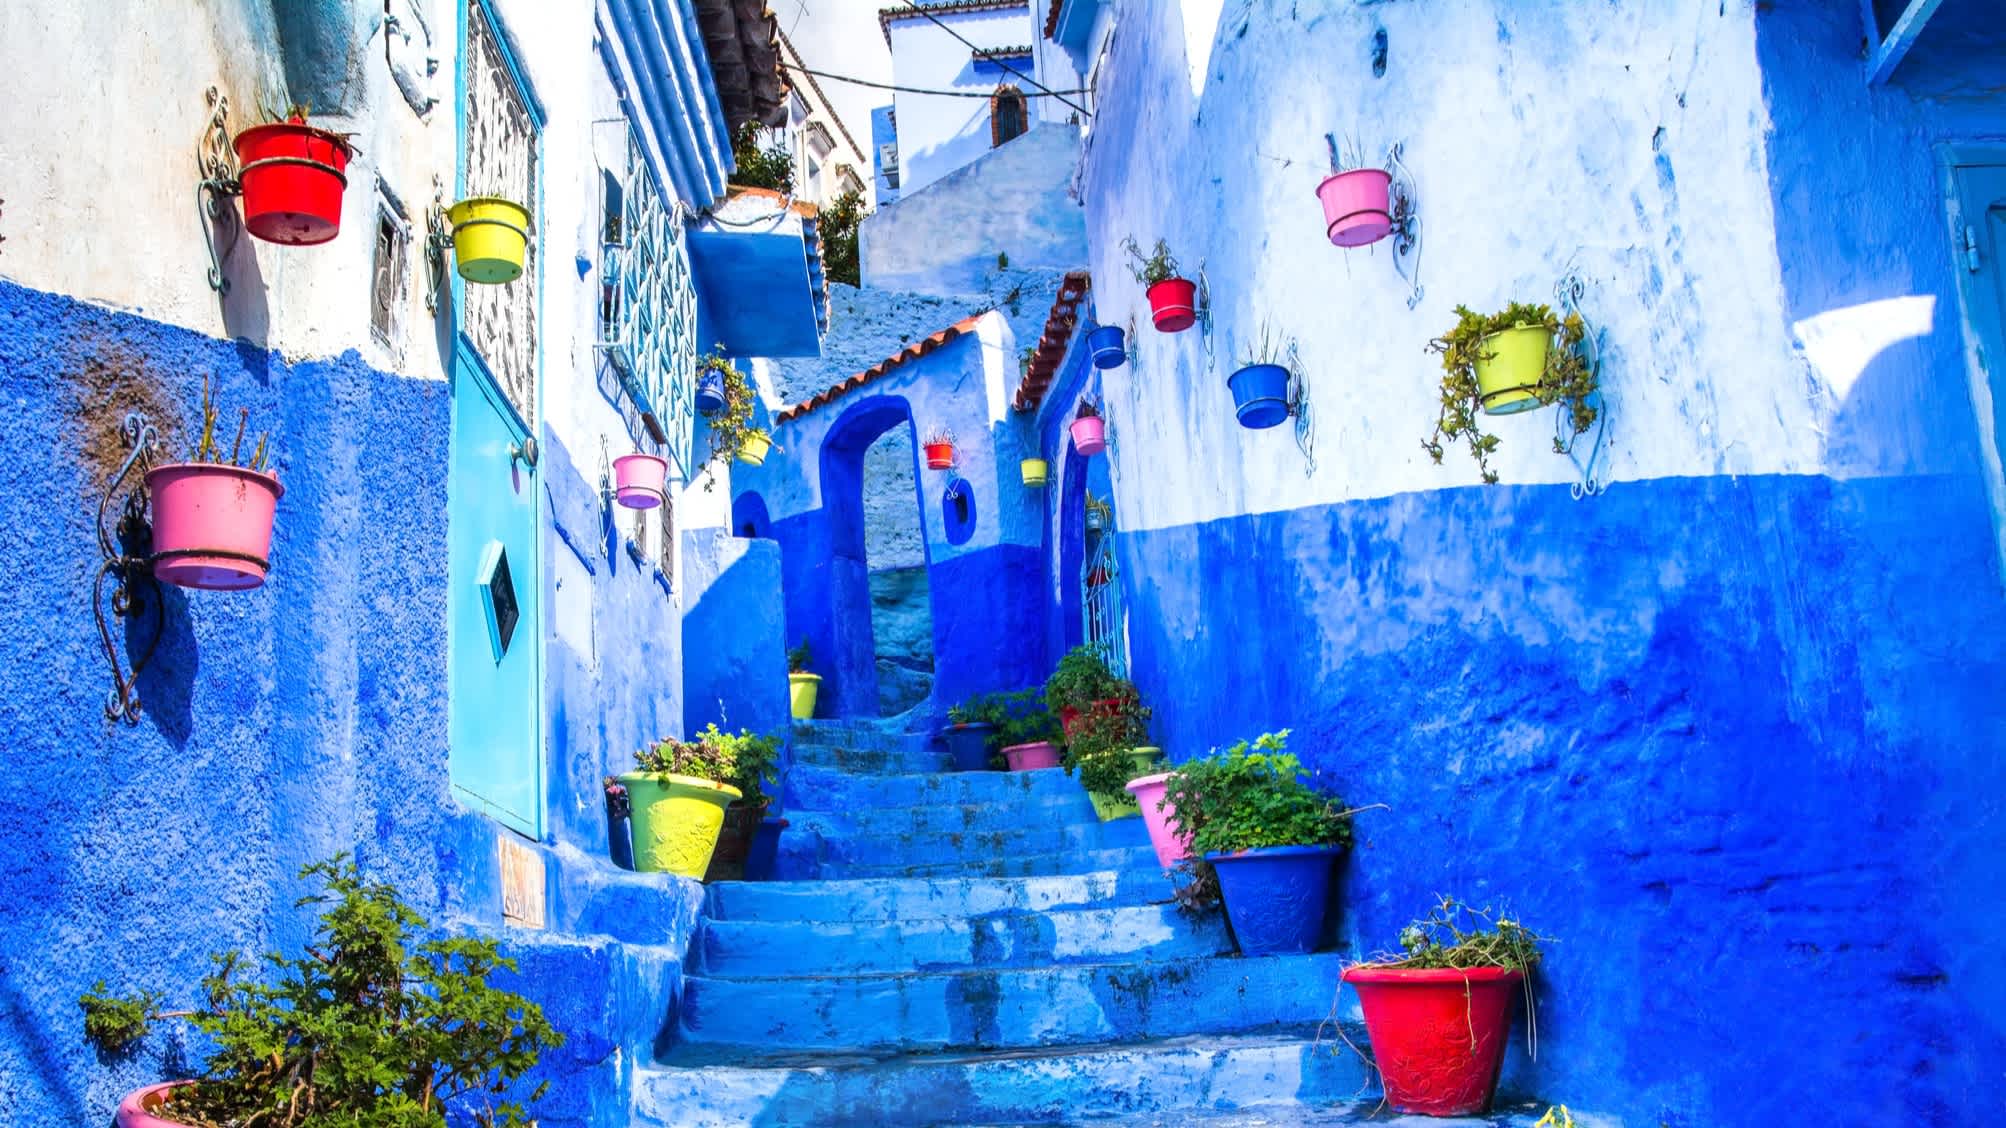 Blue stairs and walls with colorful flower pots, Chefchaouen, Morocco